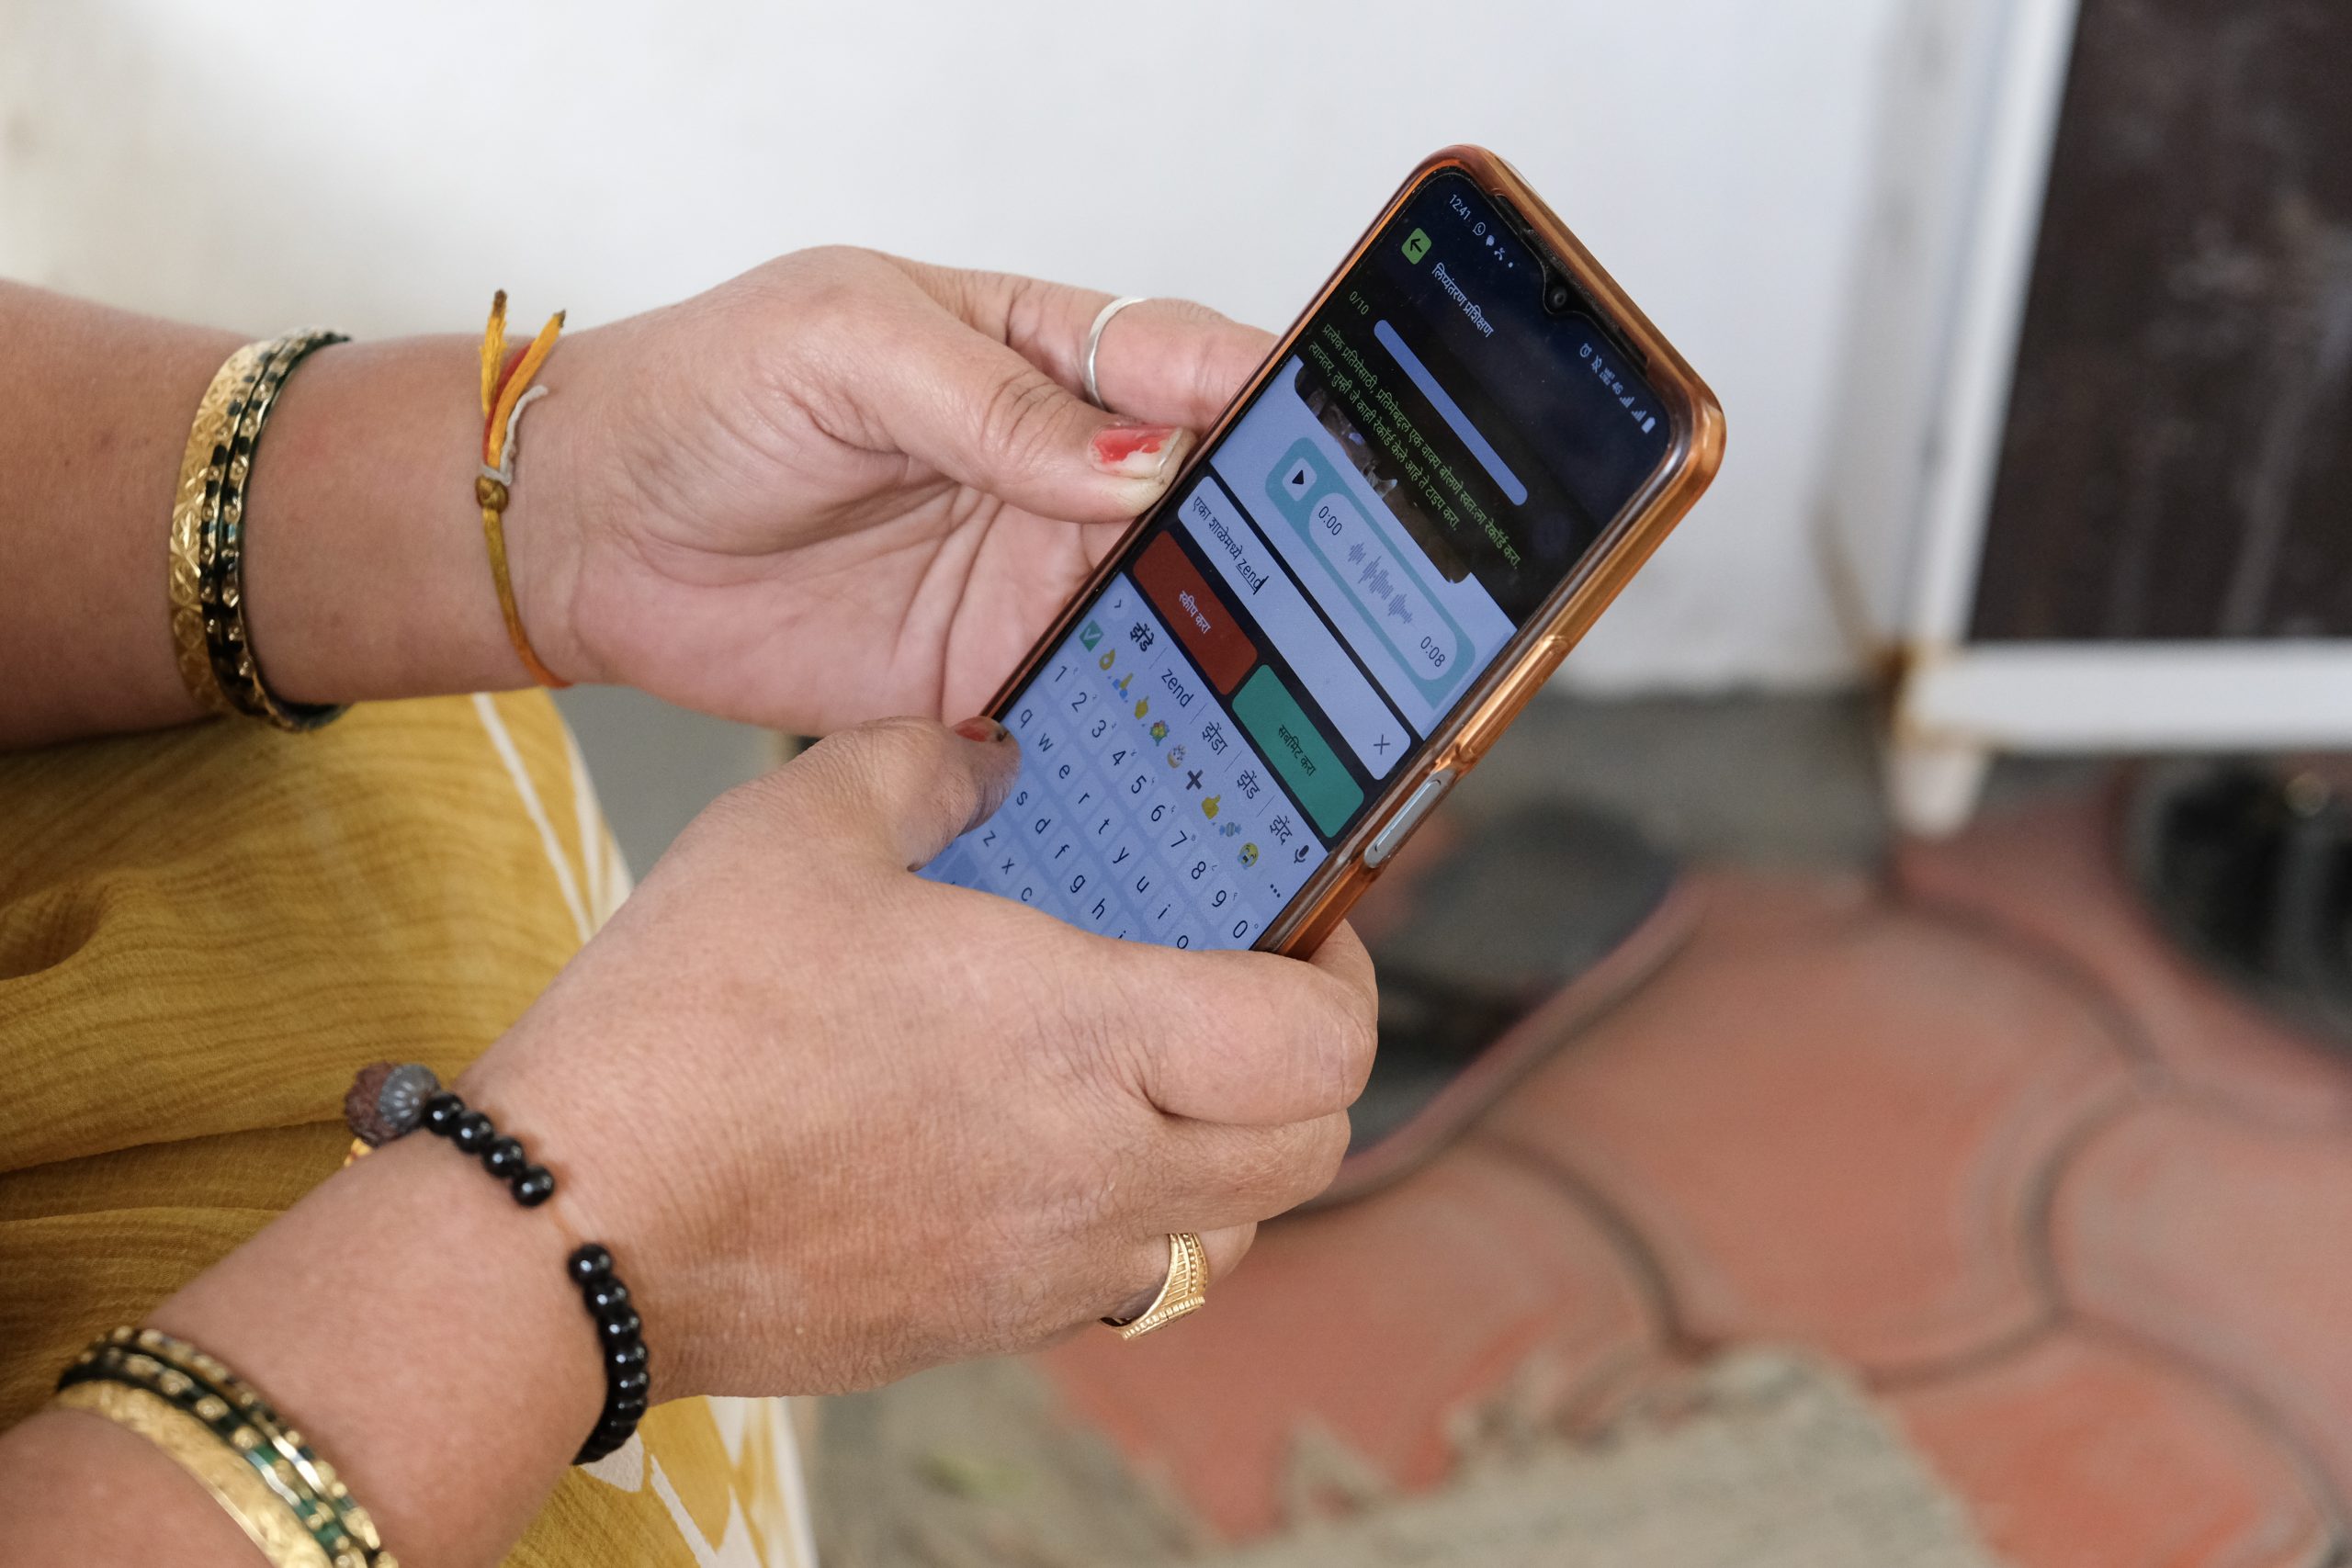 A woman’s hands holding a smartphone